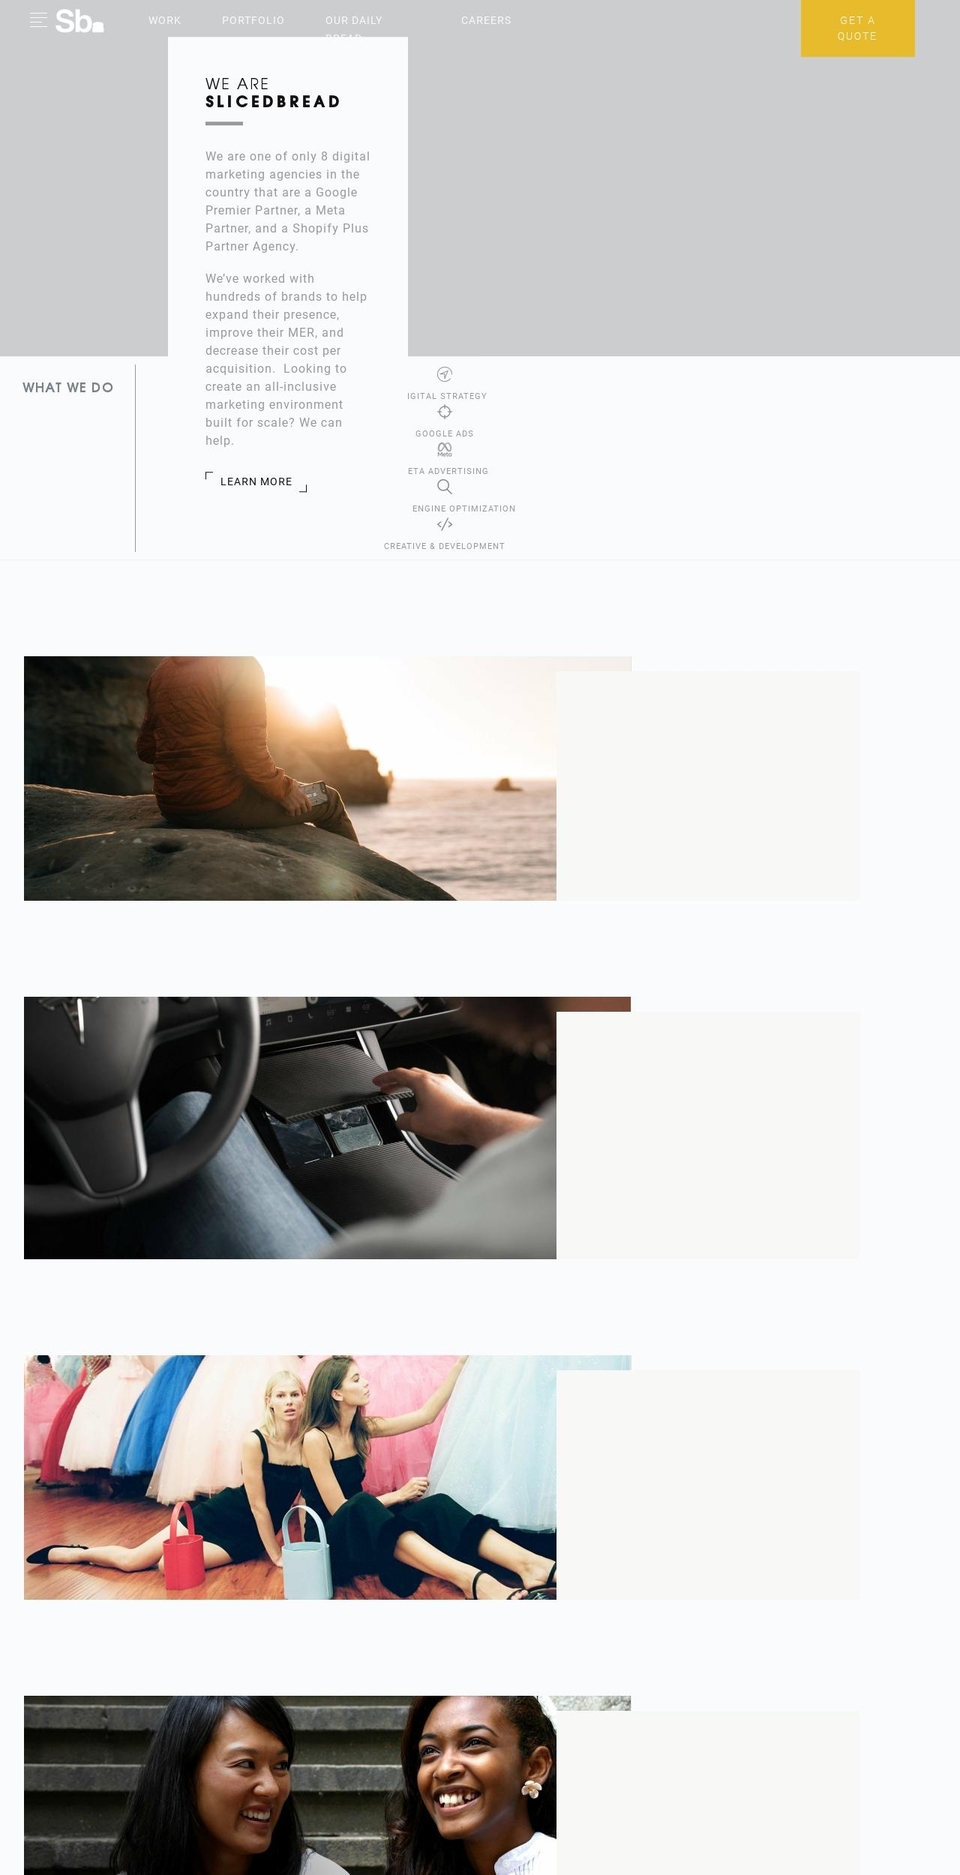 Copy of Sb  Gold Accent Update Shopify theme site example slicedbread.agency